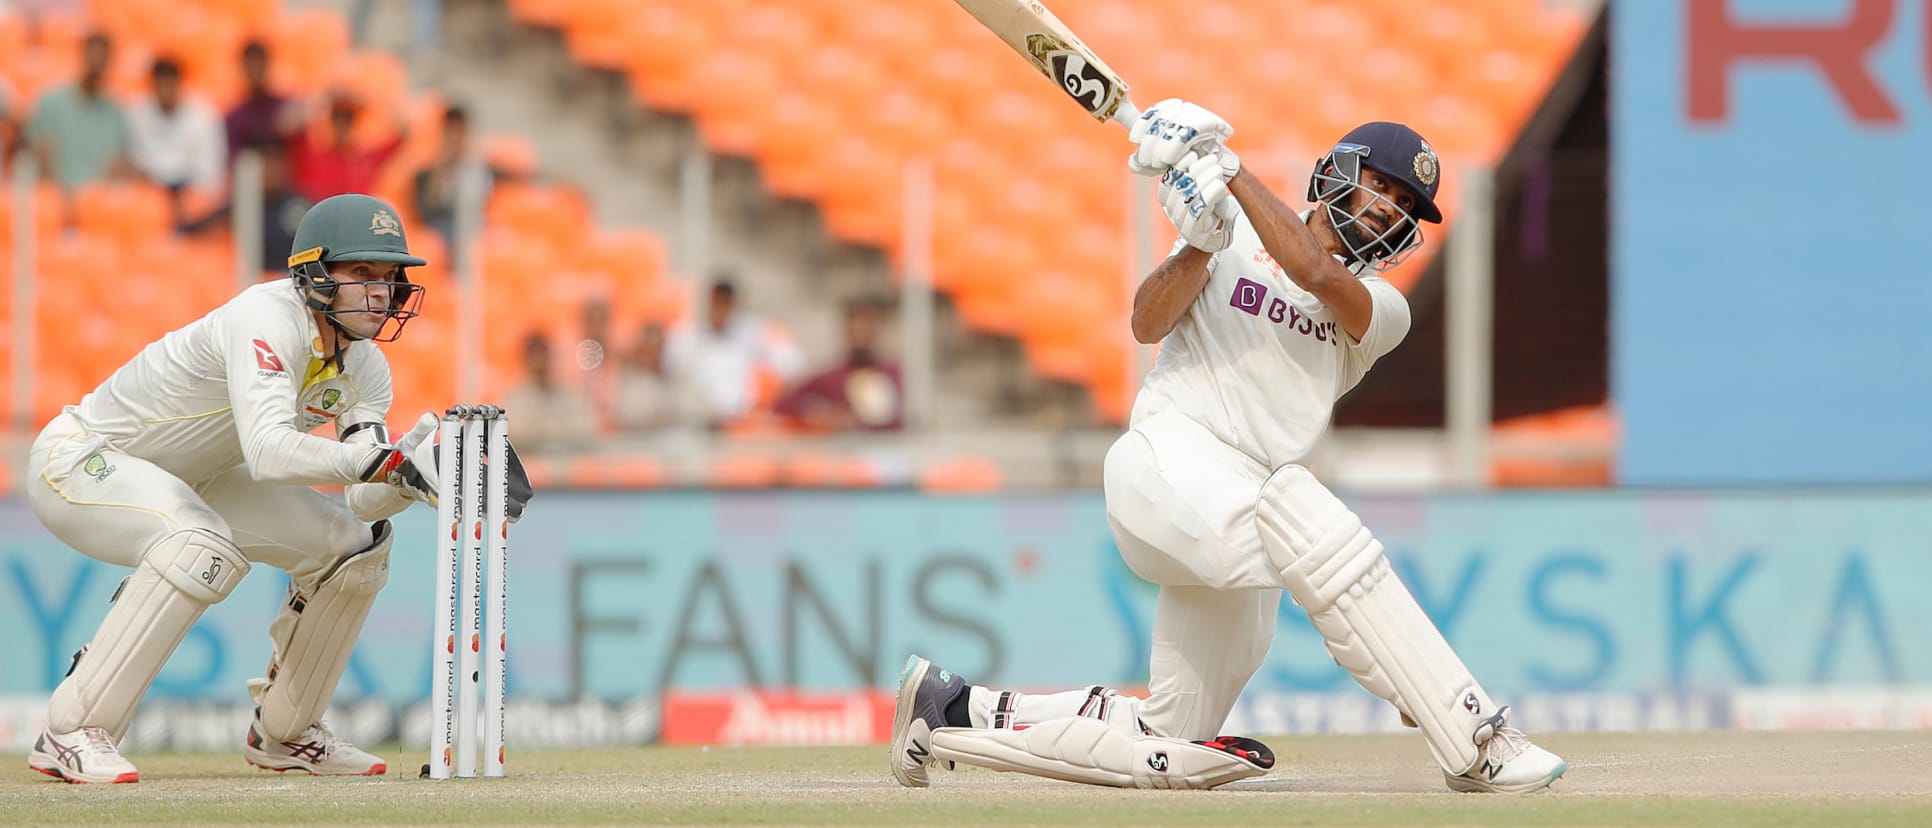 Axar Patel scored a cracking 79 in the fourth Test with five fours and four sixes